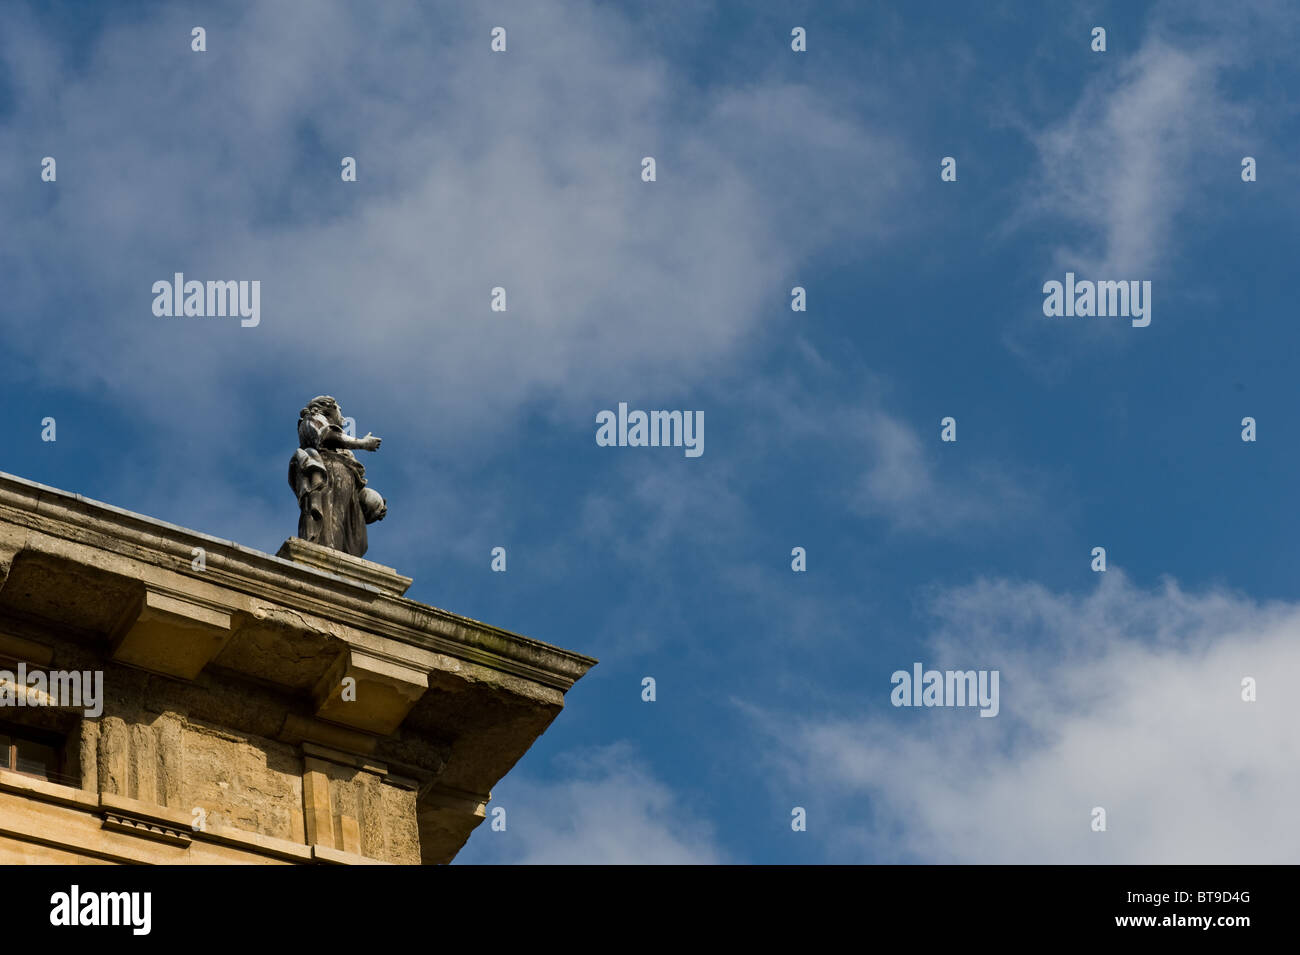 A sculpture atop the Clarendon Building in Oxford, UK Stock Photo